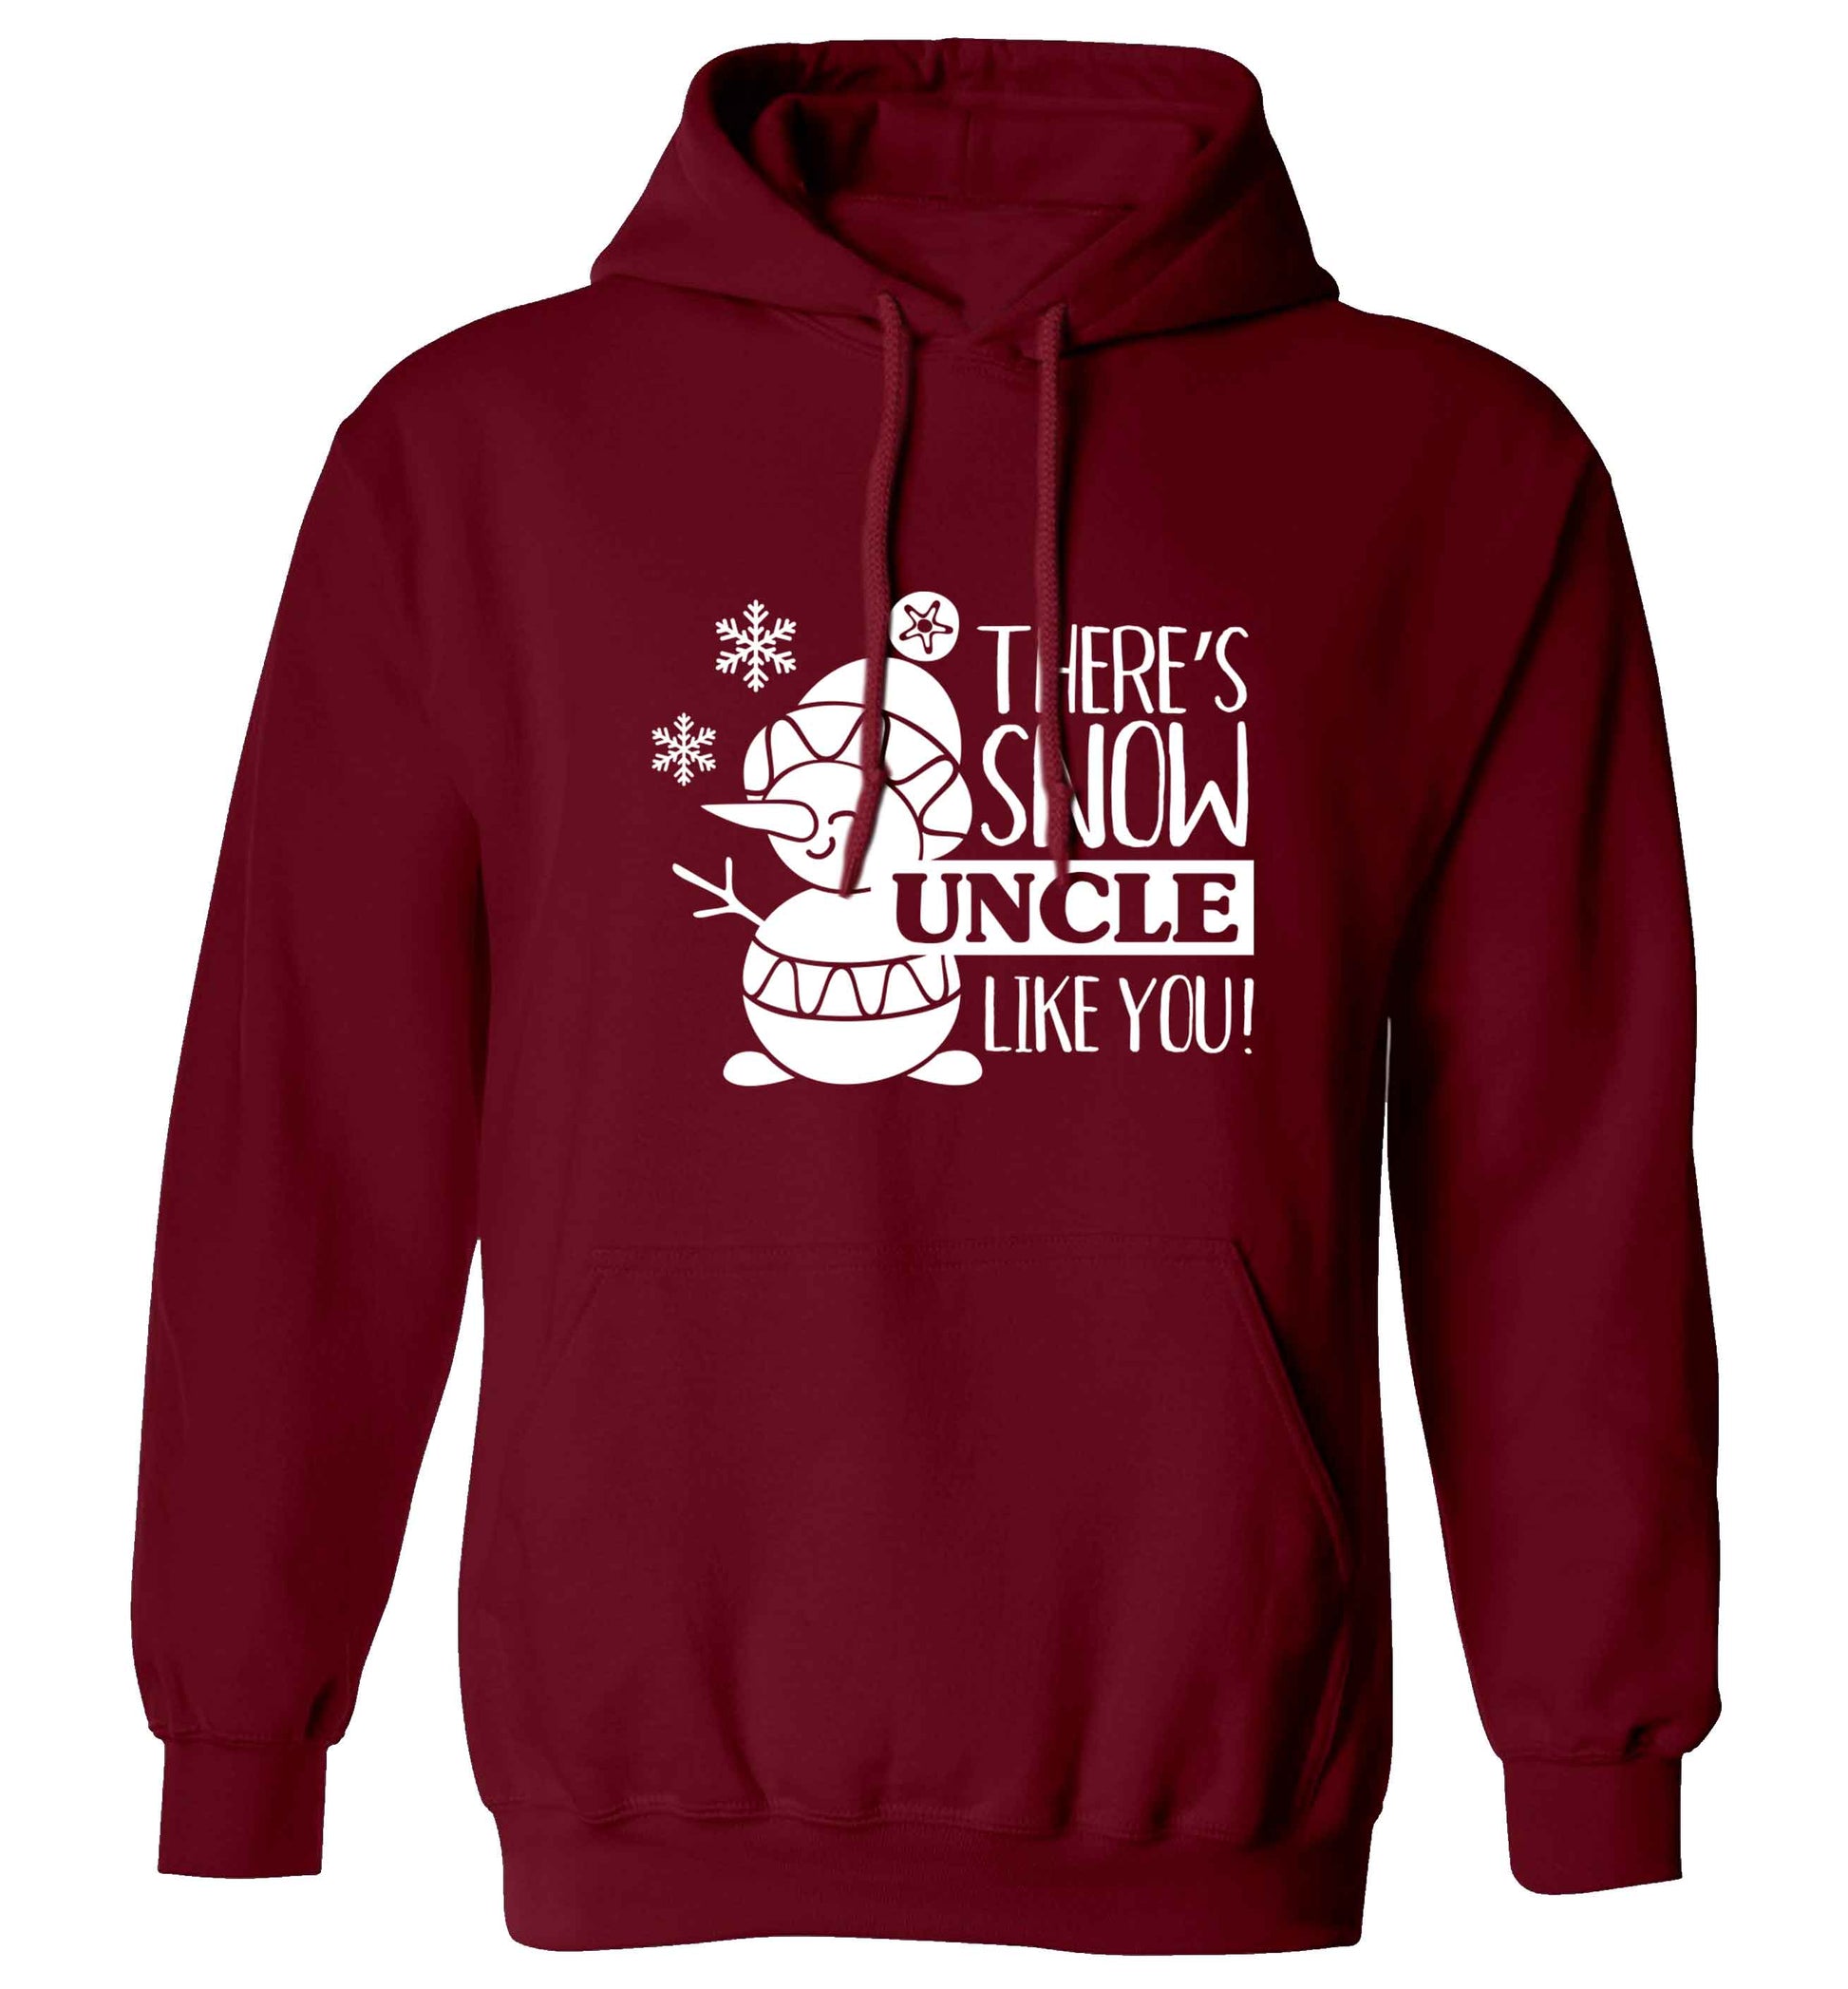 There's snow uncle like you adults unisex maroon hoodie 2XL